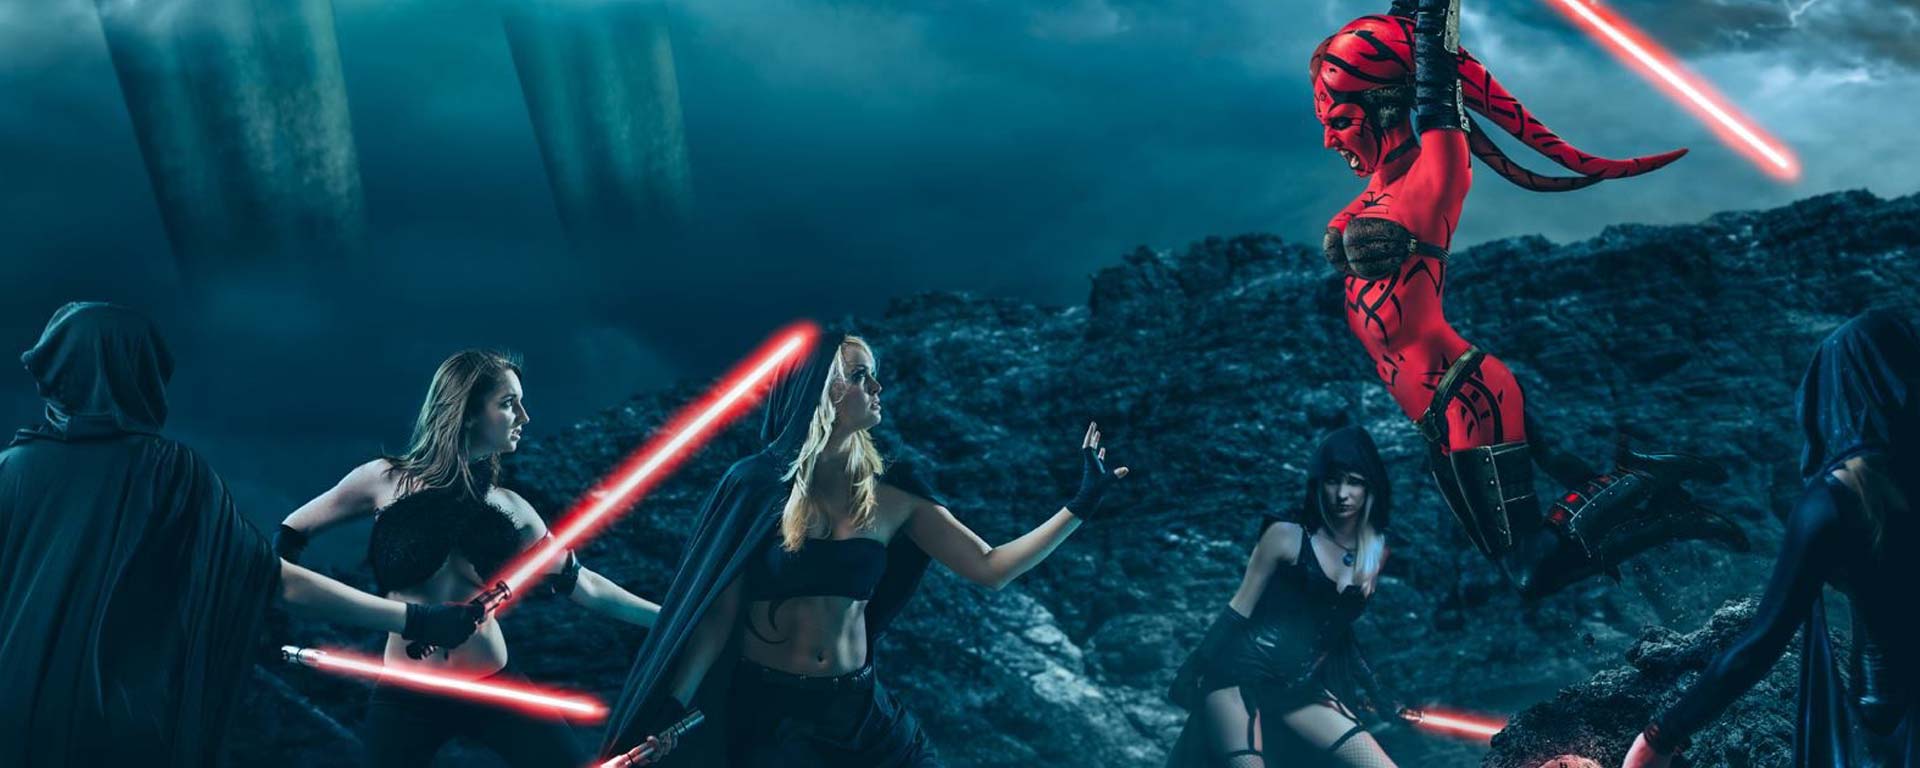 Featured Sexy StarWars Costumes and Clothing Roundup